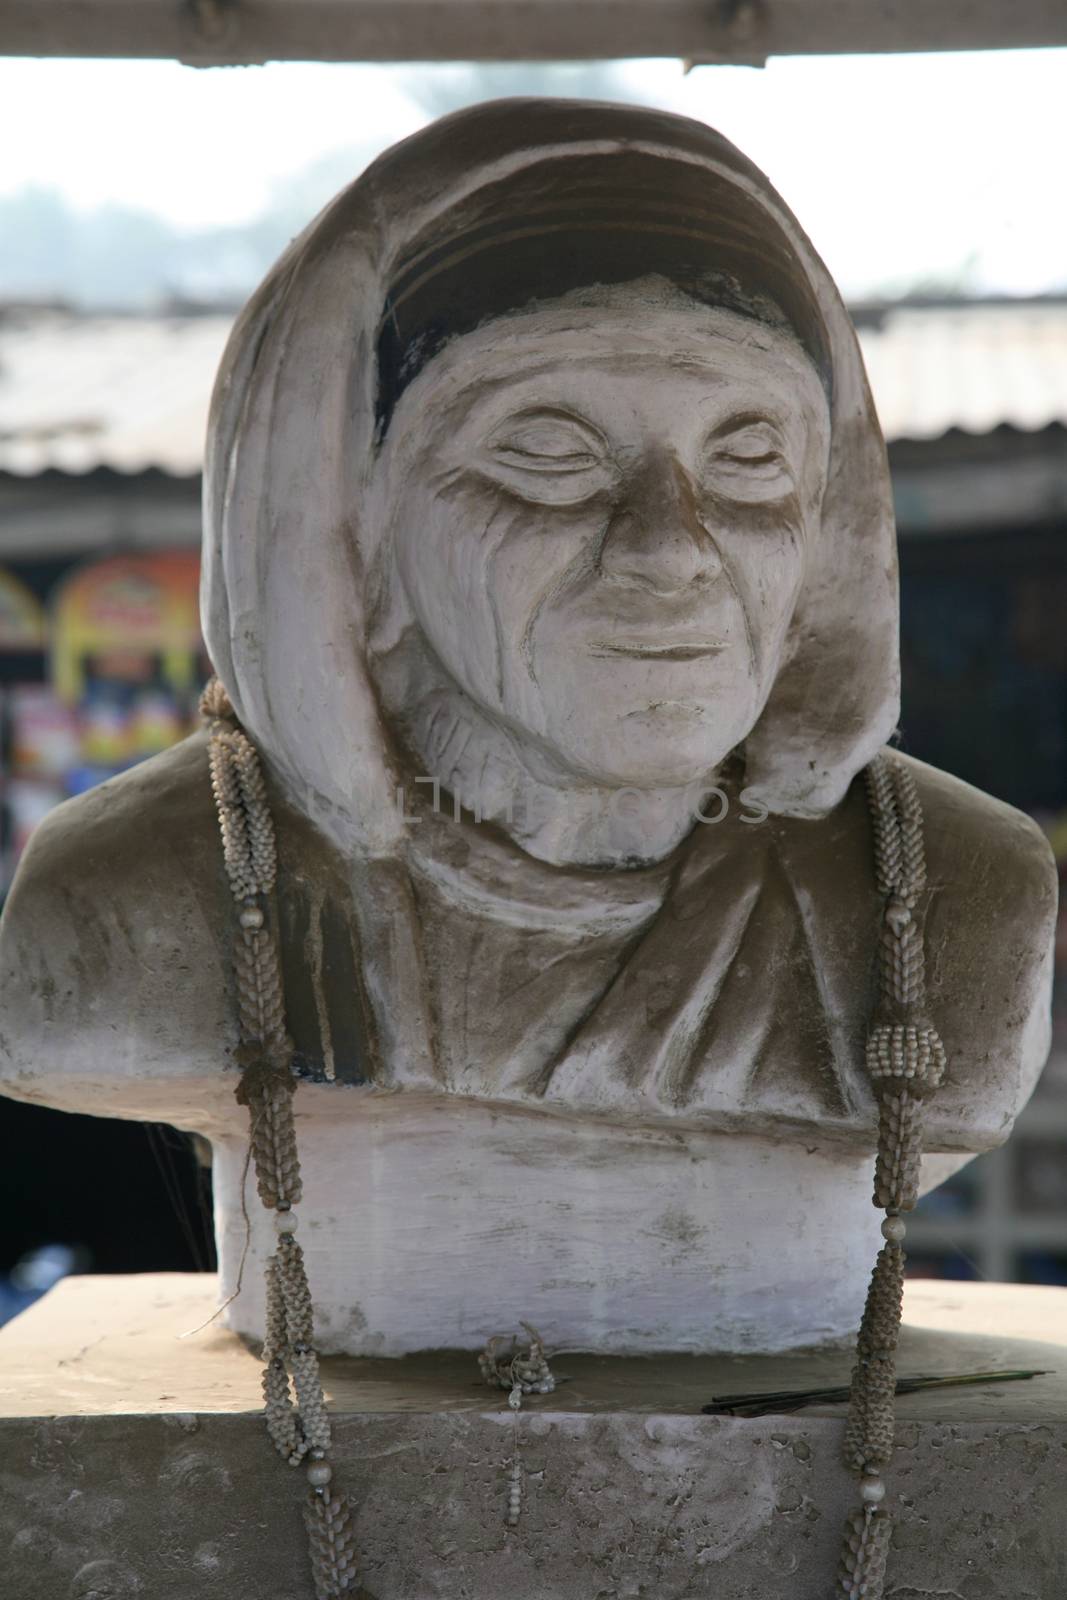 Mother Teresa monument in a rural area of Sundarbans, West Bengal, India by atlas